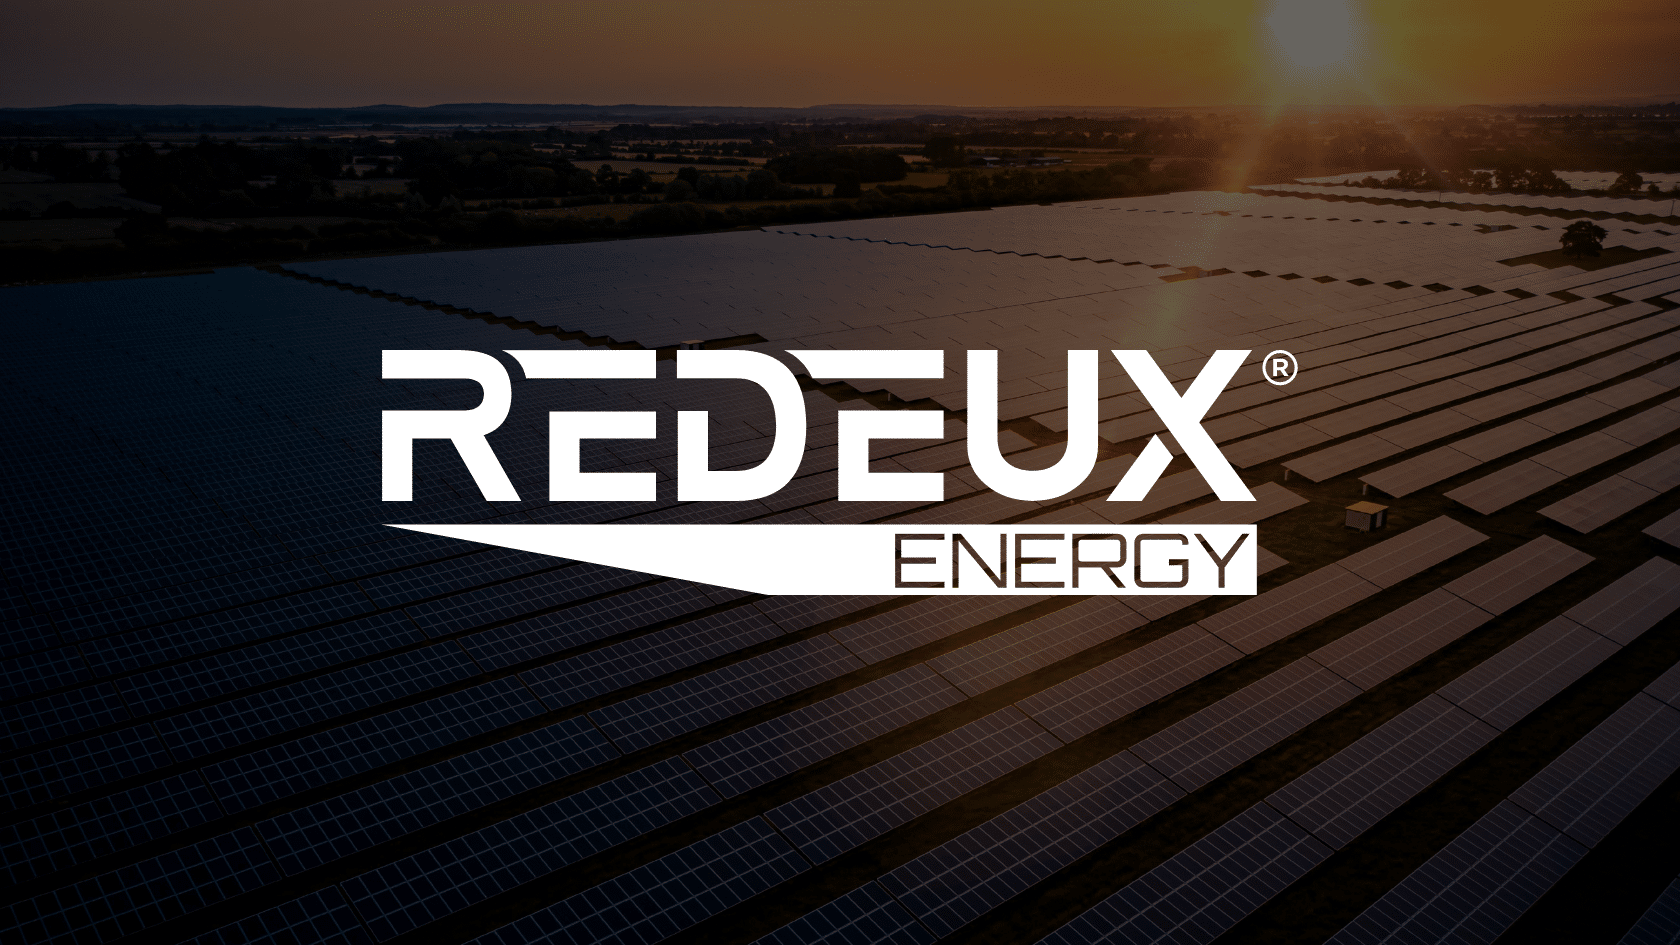 Fueling Future Growth for Redeux Energy with OnePlan